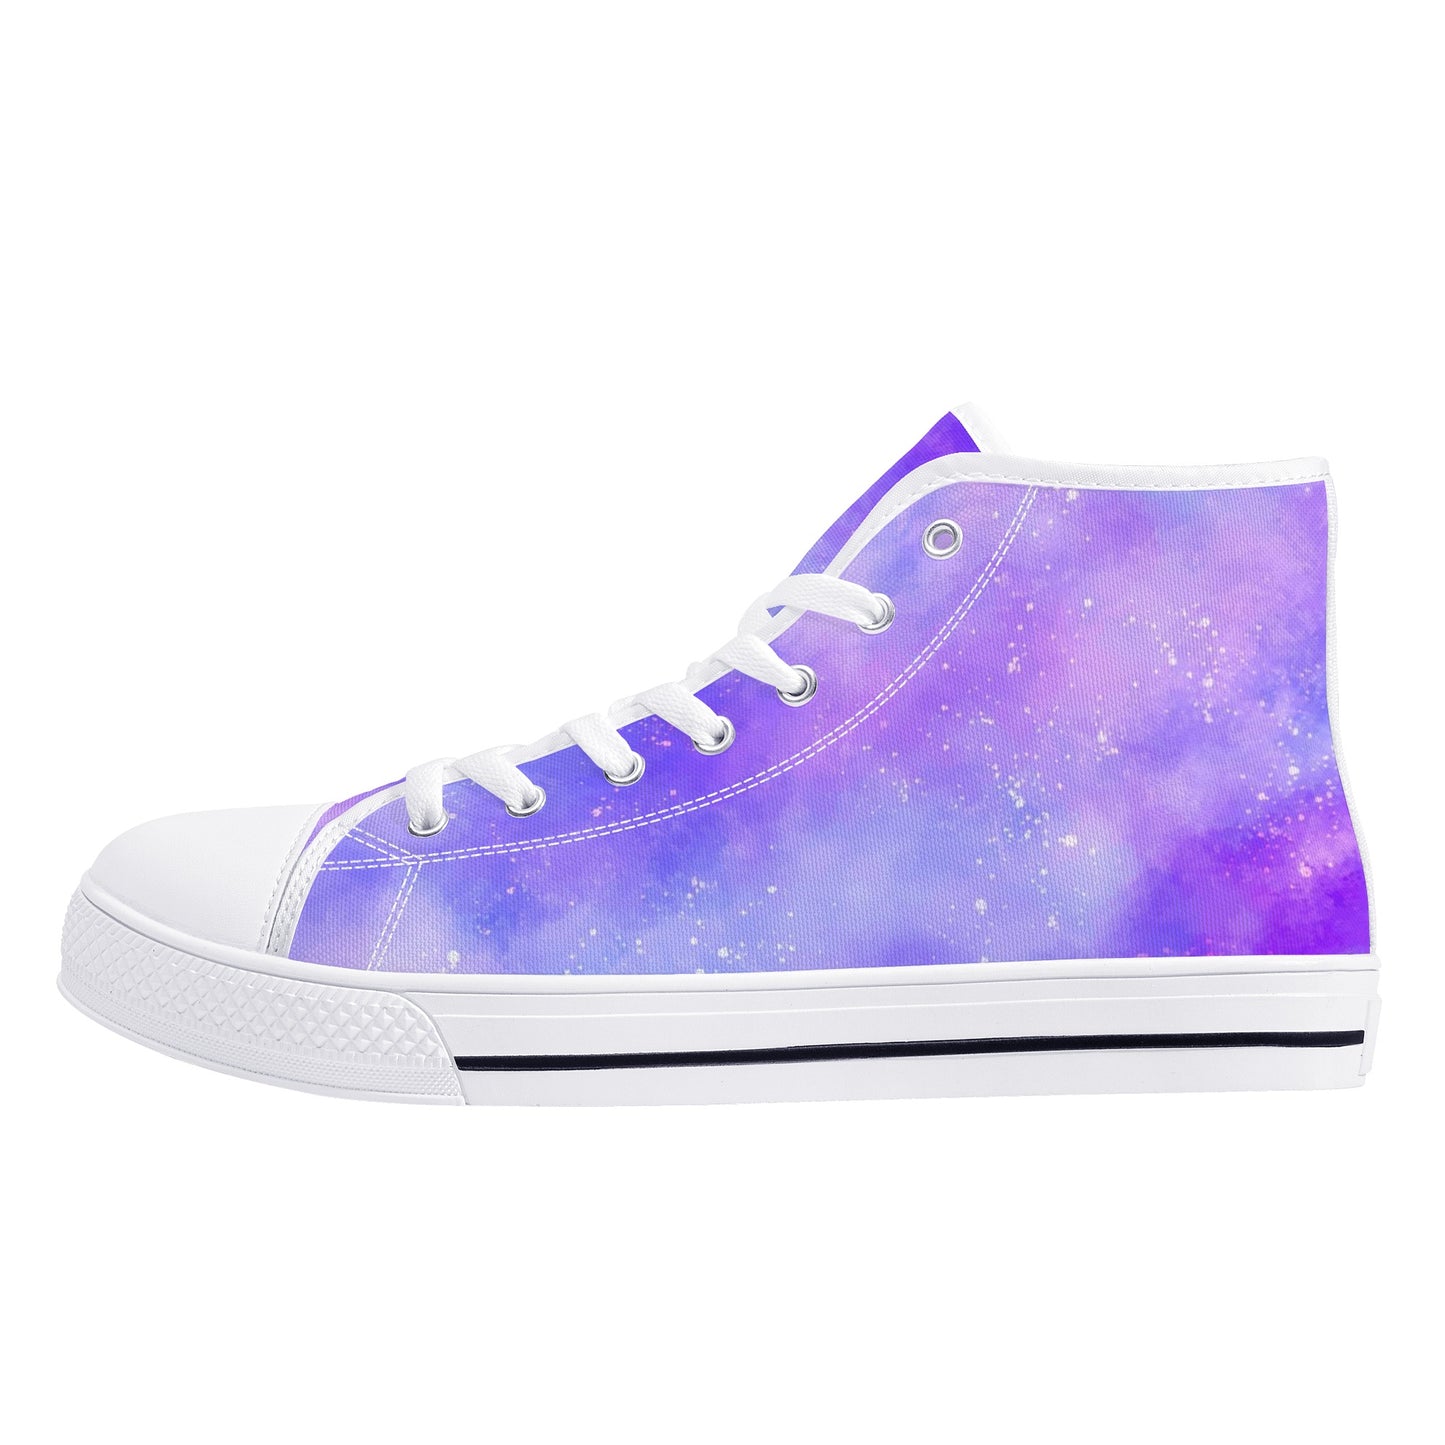 Purple Galaxy Women High Top Shoes, Pink Cosmos Universe Lace Up Sneakers Footwear White Canvas Streetwear Girls Designer Gift Idea